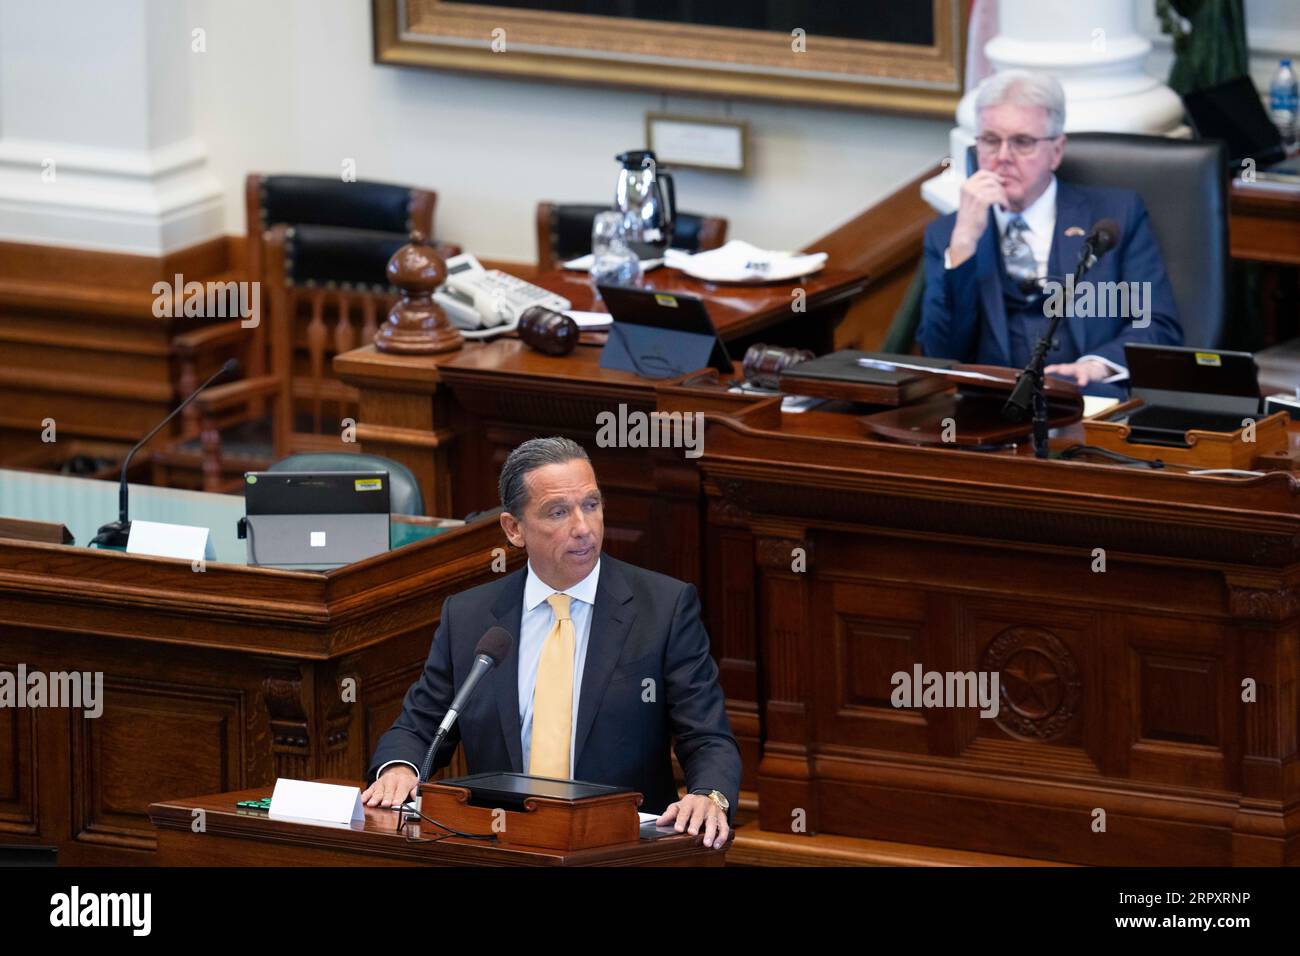 Defense attorney TONY BUZBEE of Houston offers opening remarks during the afternoon session on the first day of impeachment trial of the Texas Attorney General Ken Paxton for alleged ethic lapses and criminal violations during his three terms in office. Credit: Bob Daemmrich/Alamy Live News Stock Photo